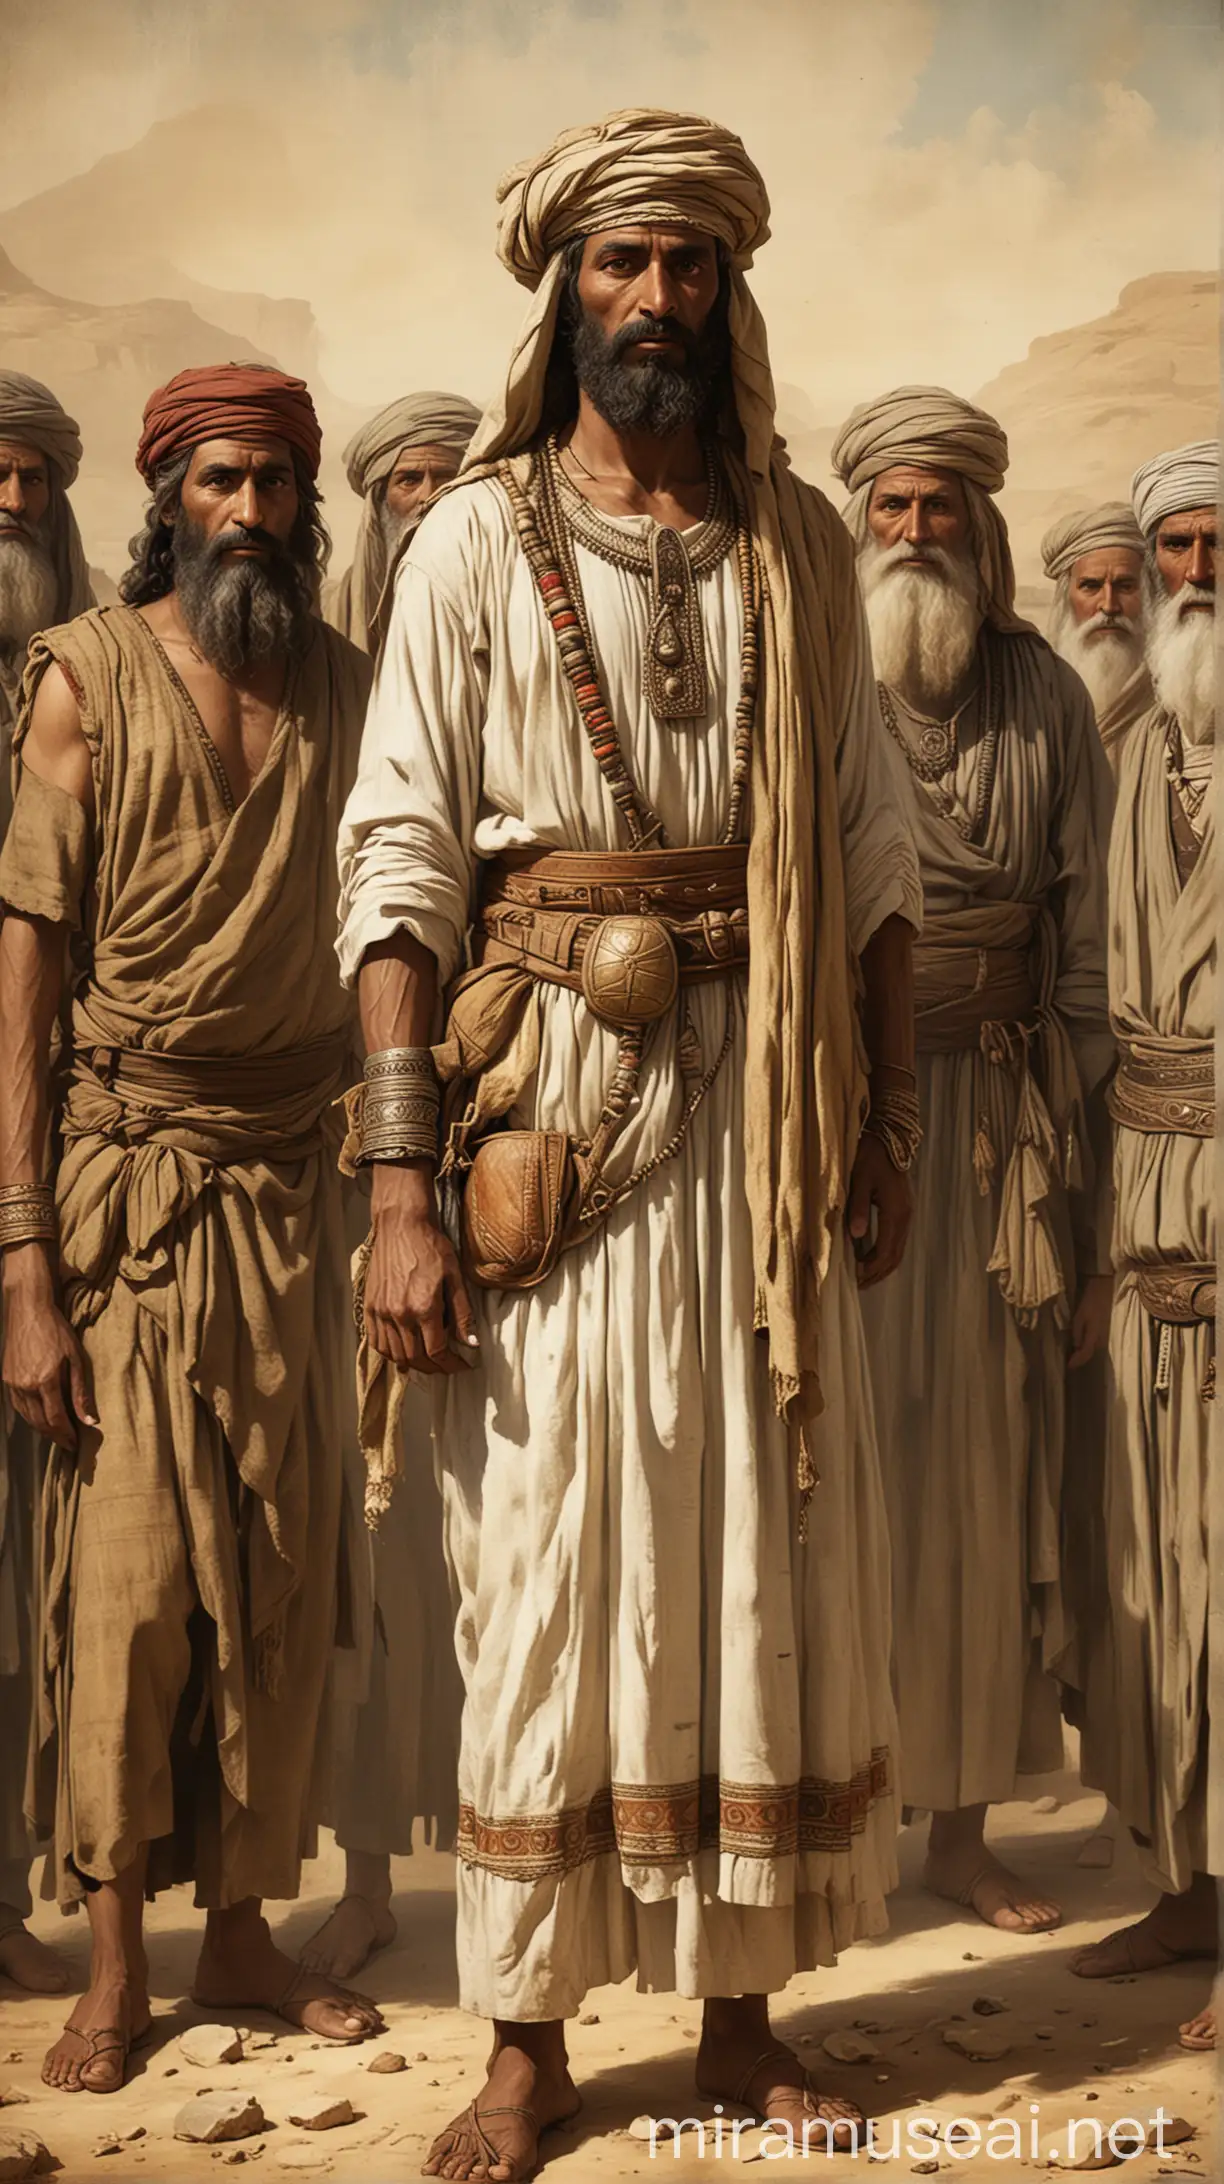 Illustration of Jimnah the 17th Century BC Figure Amidst a Clan in Ancient Israelite Attire